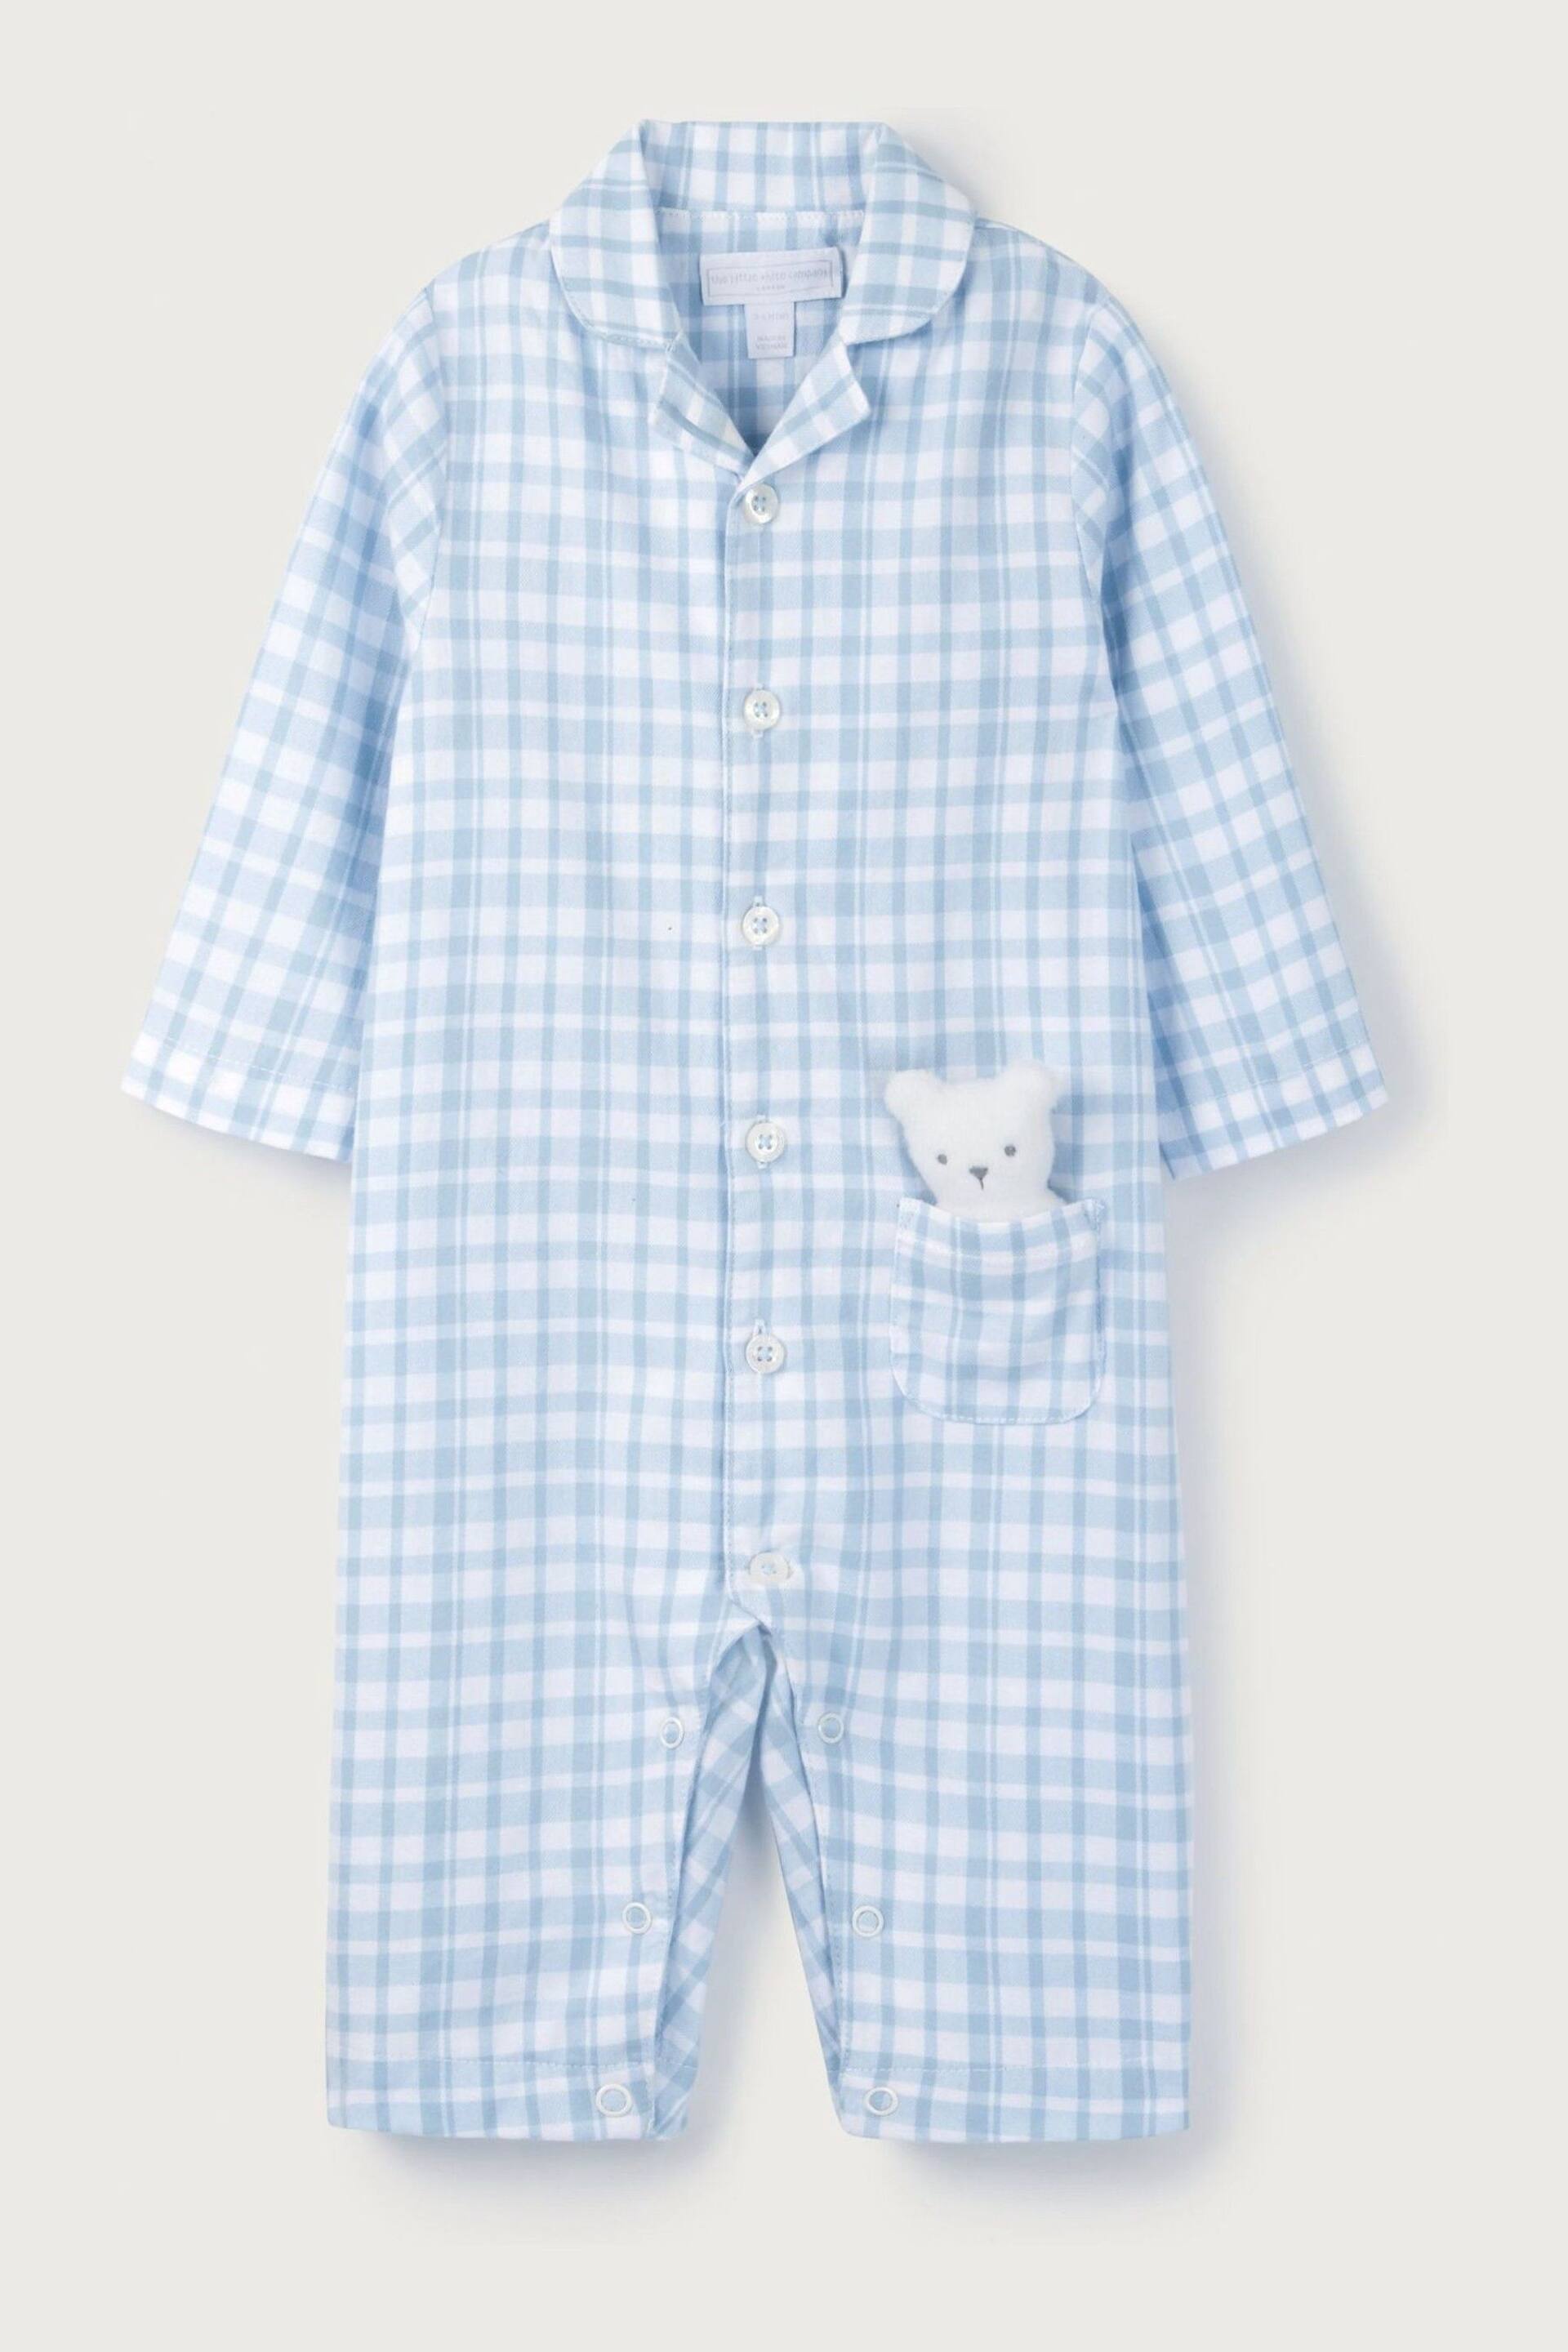 The White Company Organic Cotton Blue Gingham Sleepsuit With Bear - Image 3 of 4